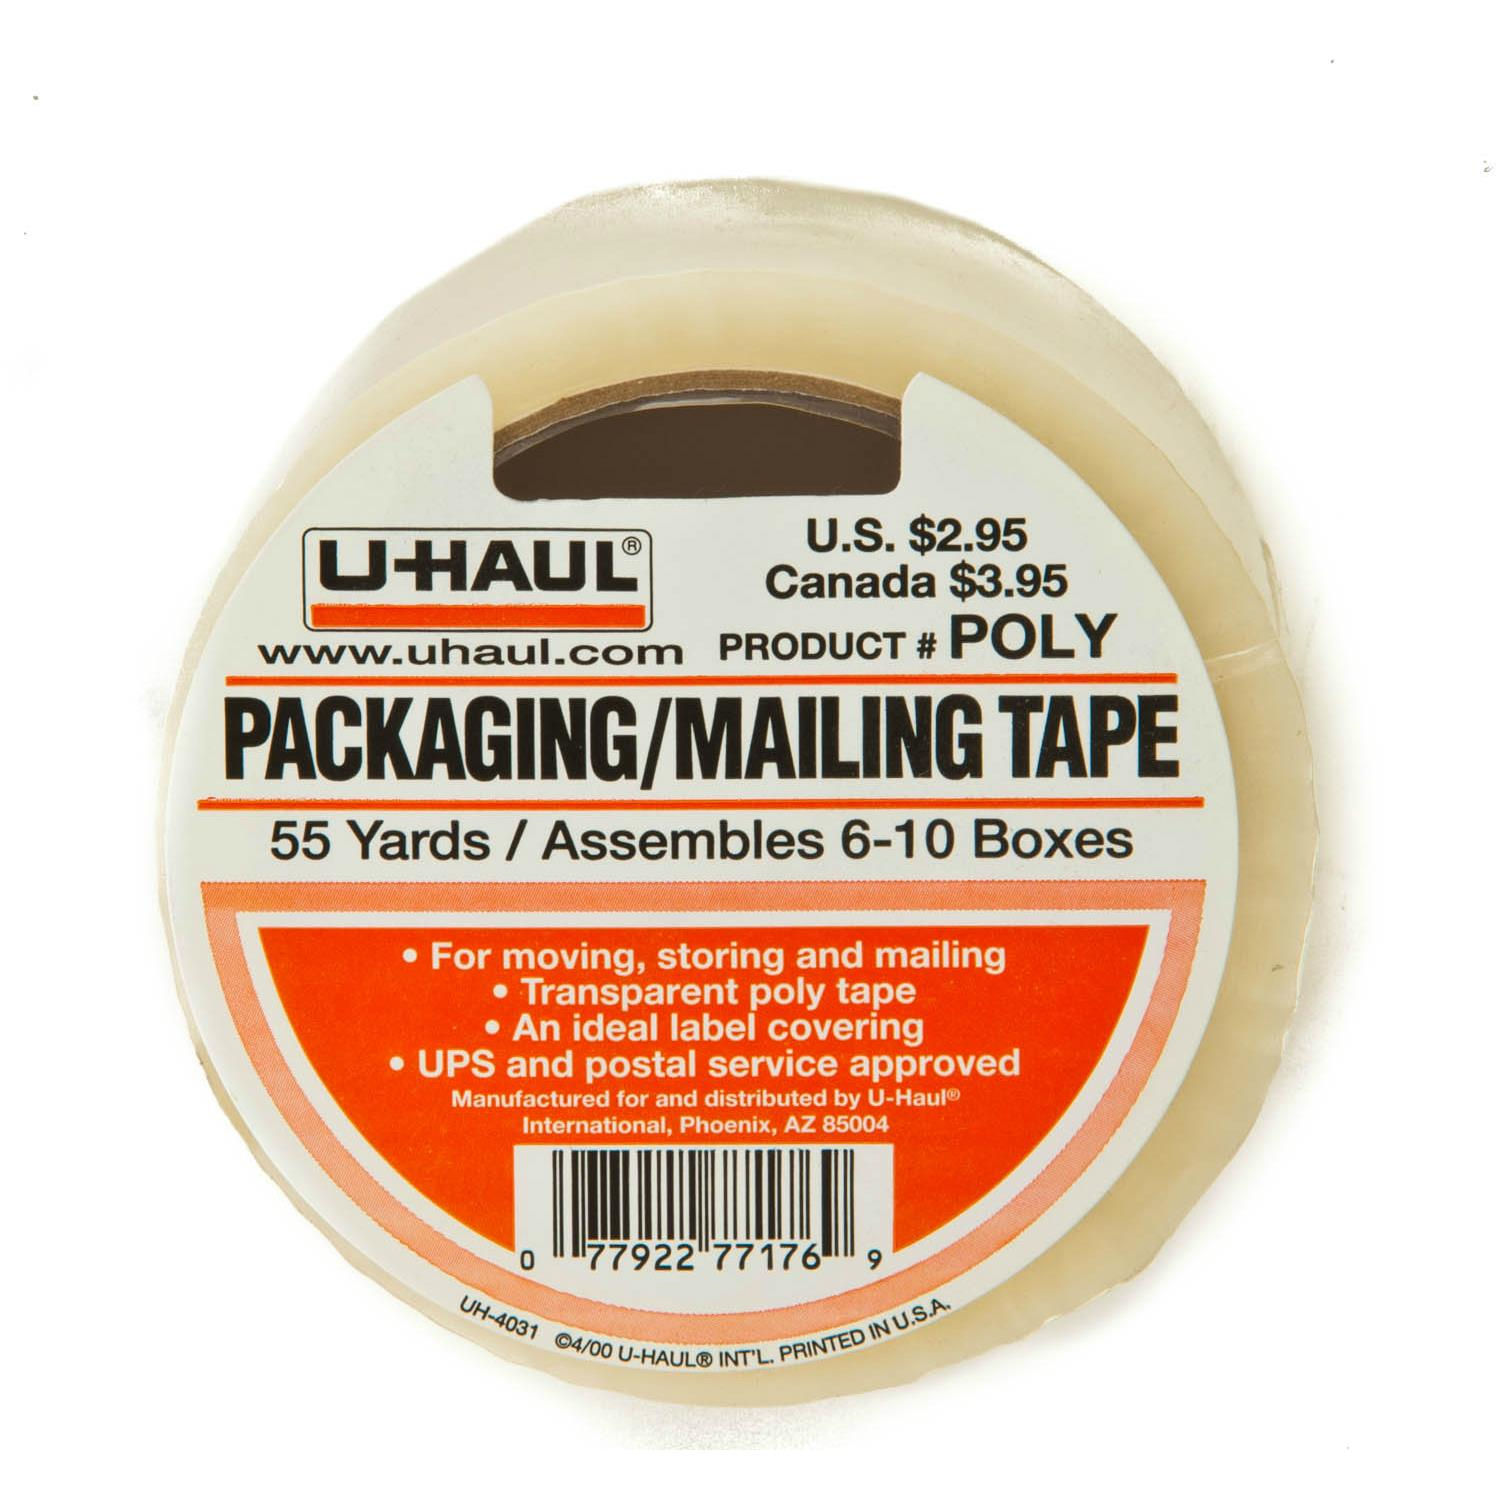 Packing and Mailing Tape $4.00